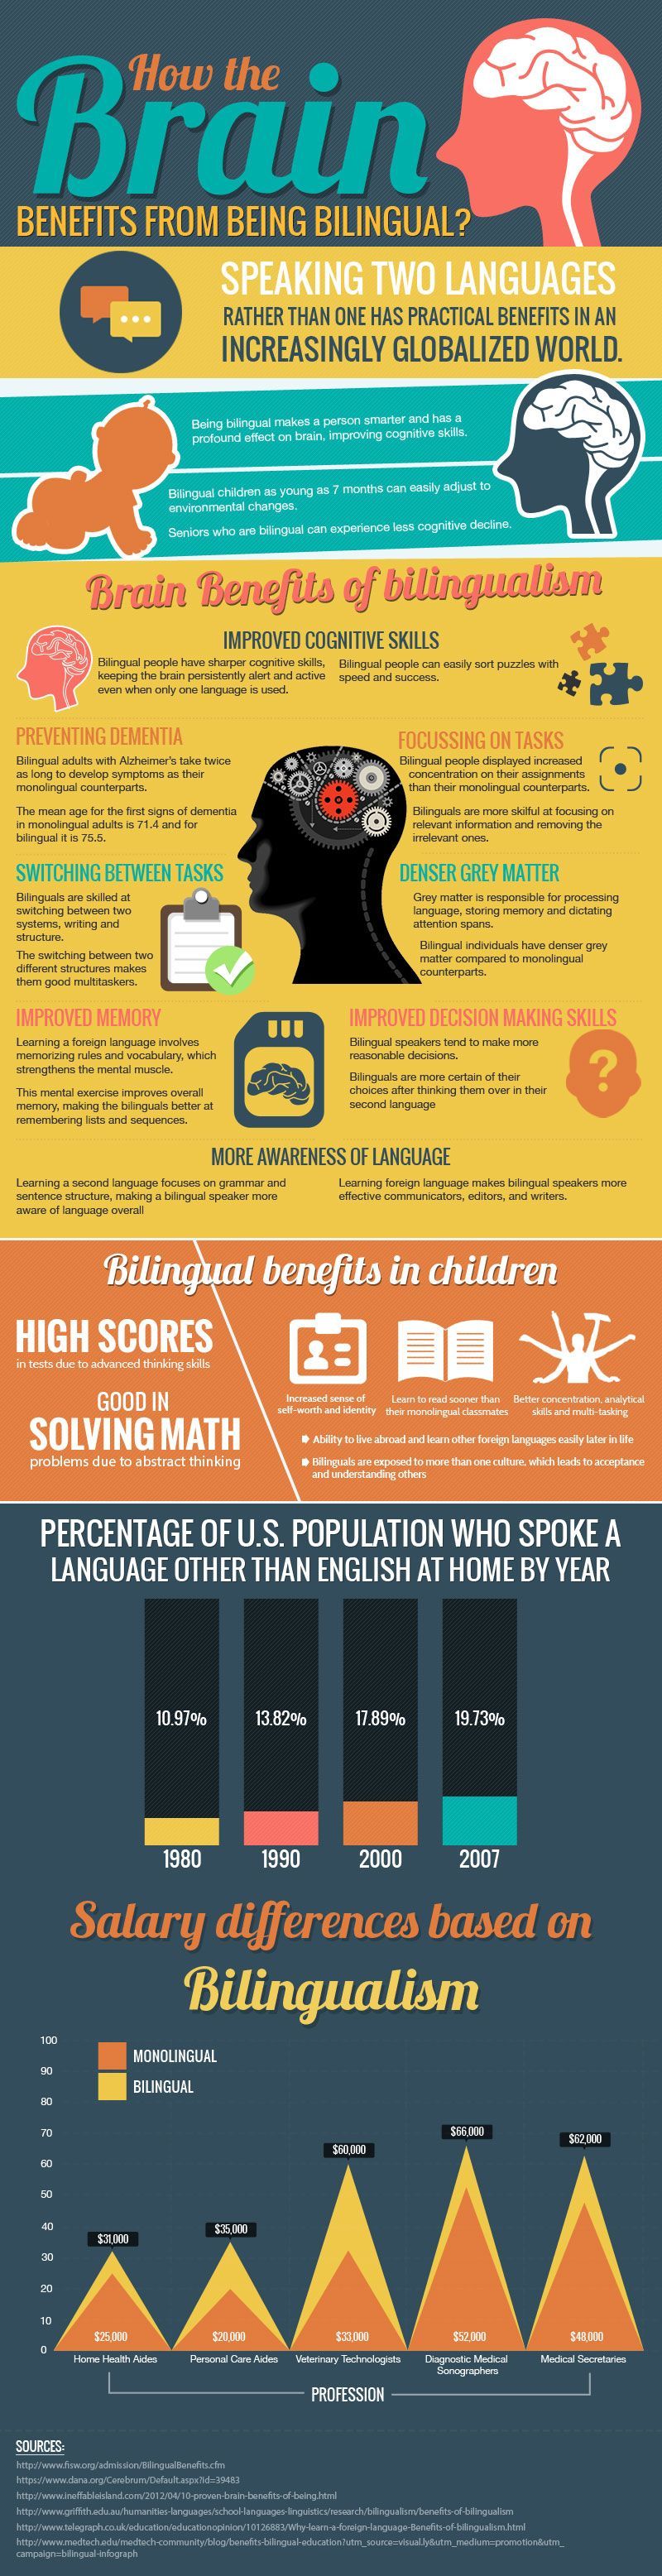 How the Brain Benefits from Being Bilingual – Infographic